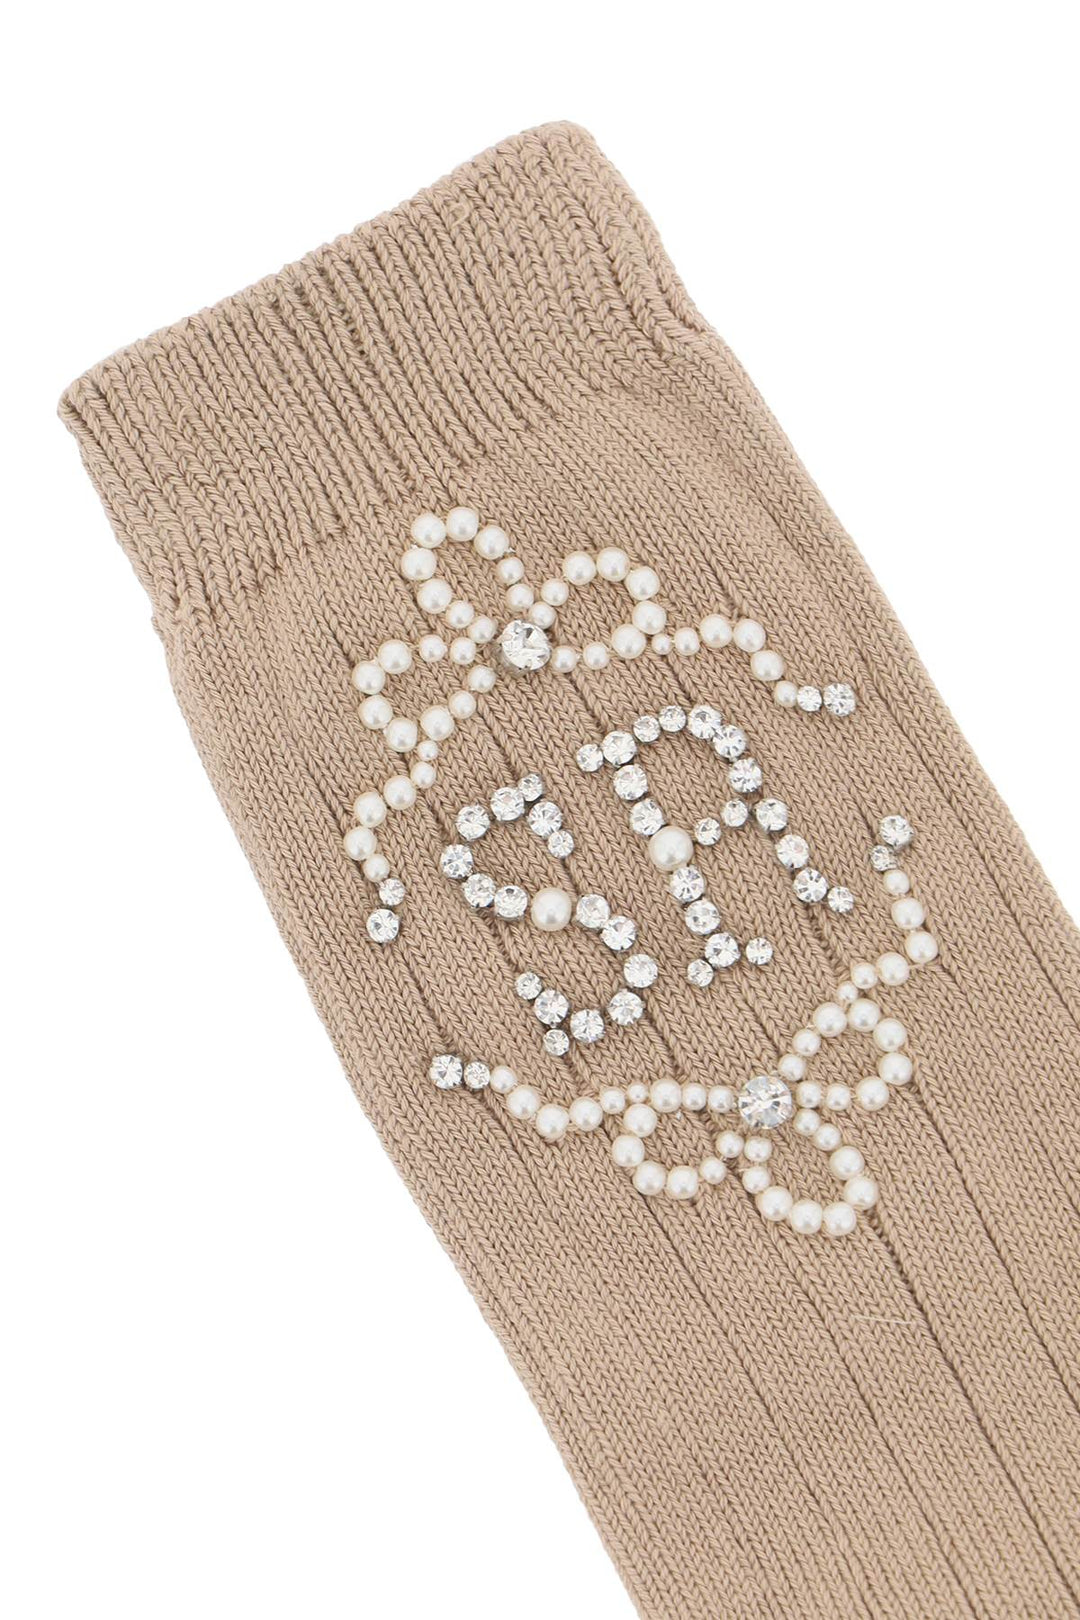 Simone Rocha Sr Socks With Pearls And Crystals   Beige